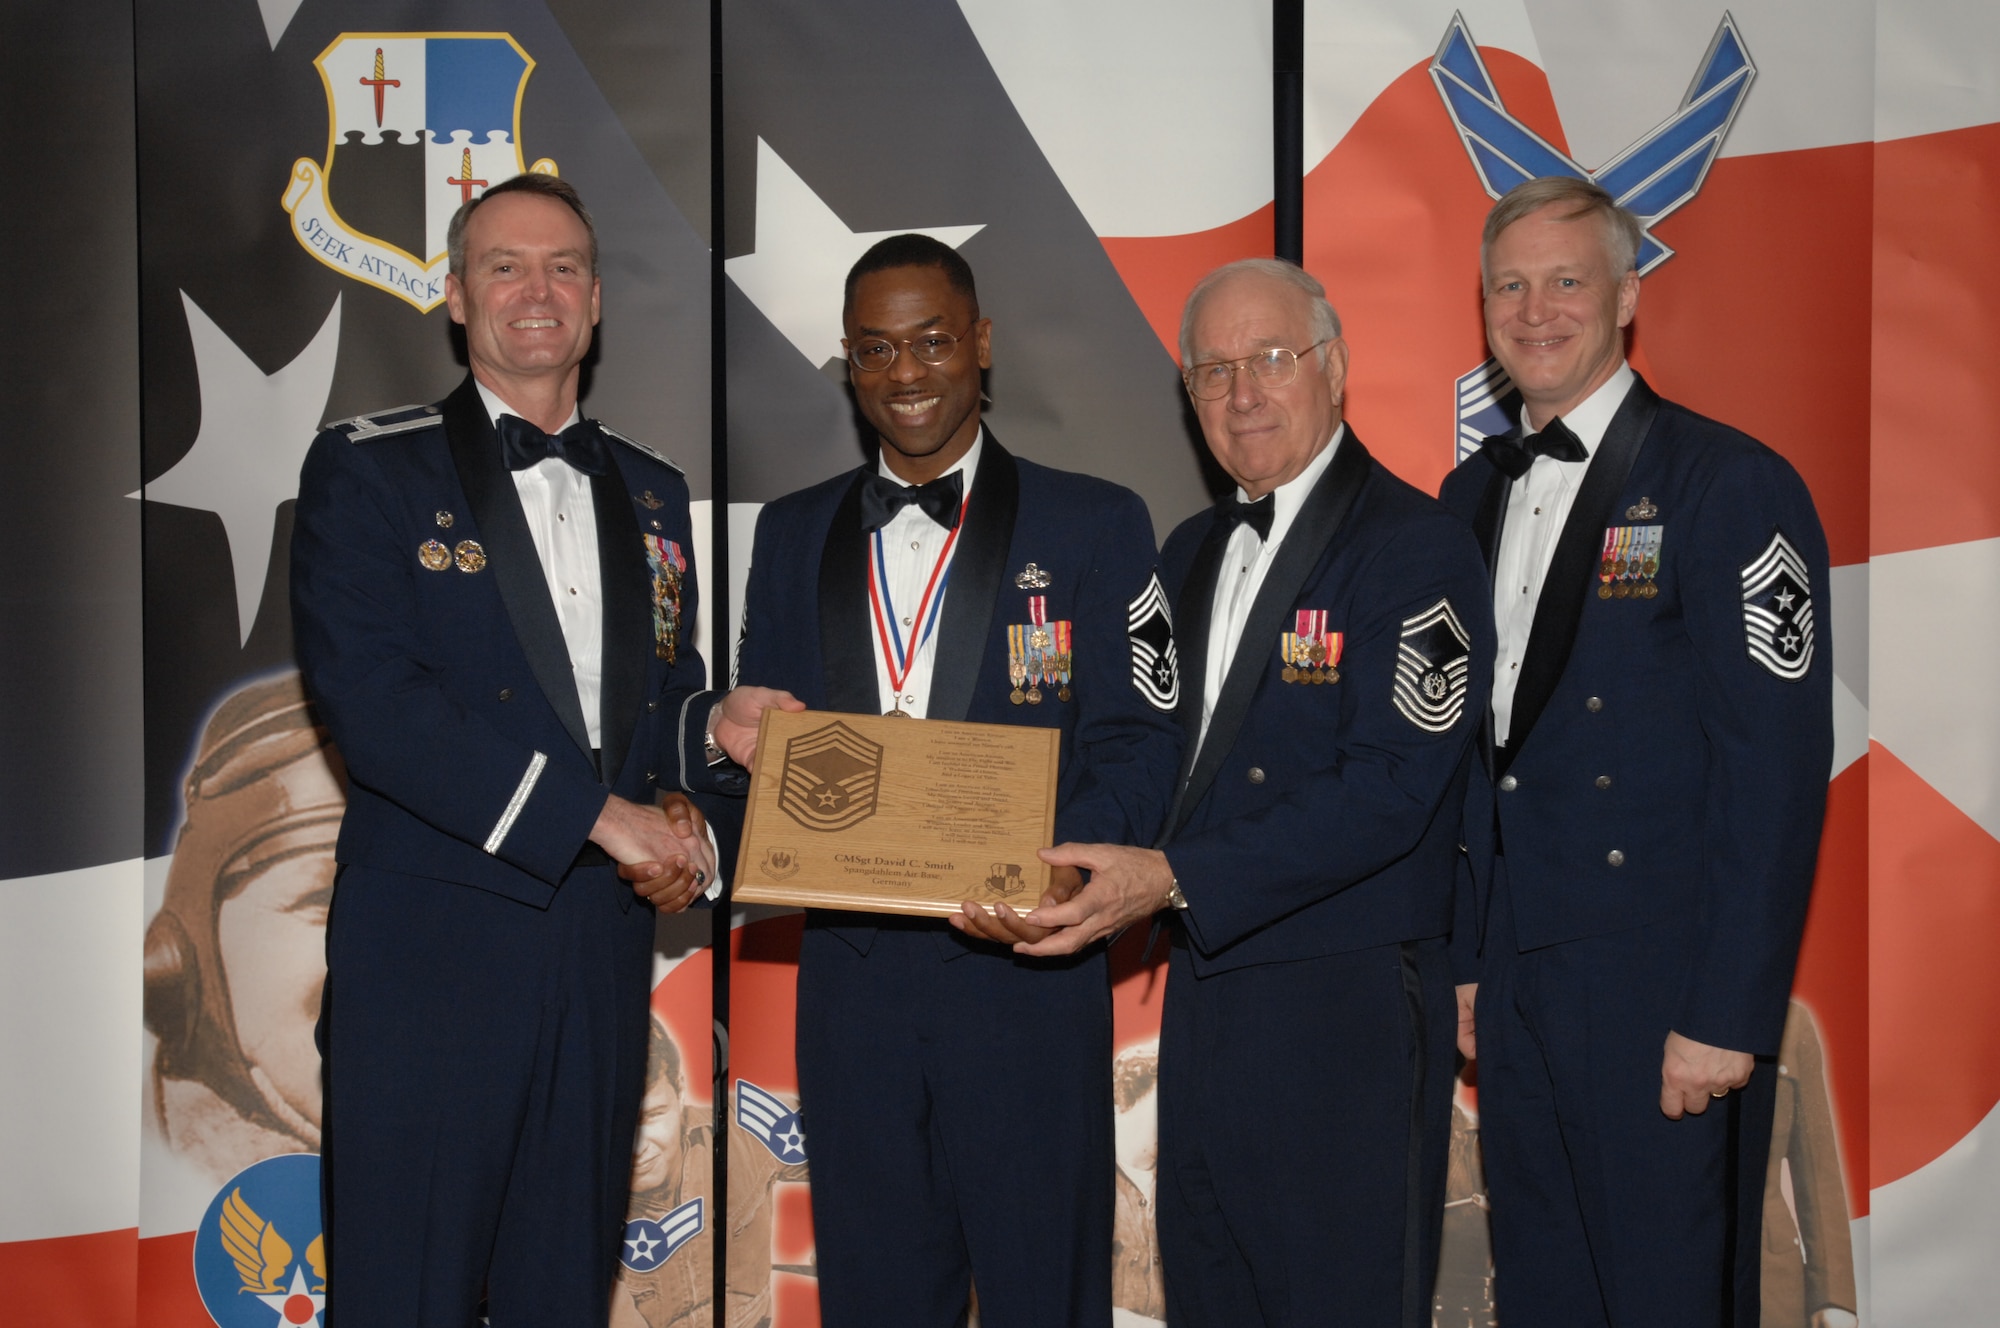 SPANGDAHLEM AIR BASE, Germany – Chief Master Sgt. David Smith, 52nd Operations Support Squadron, receives a plaque from Col. Darryl Roberson, 52nd Fighter Wing commander, Jan. 19, 2008 at Club Eifel. The plaque recognizes him as new chief master sergeant. Chief Smith was also congratulated by retired Chief Master Sgt. of the Air Force Sam Parish and Chief Master Sgt. Vance Clarke, 52nd FW command chief. (U.S. Air Force photo/Airman 1st Class Jenifer Calhoun)